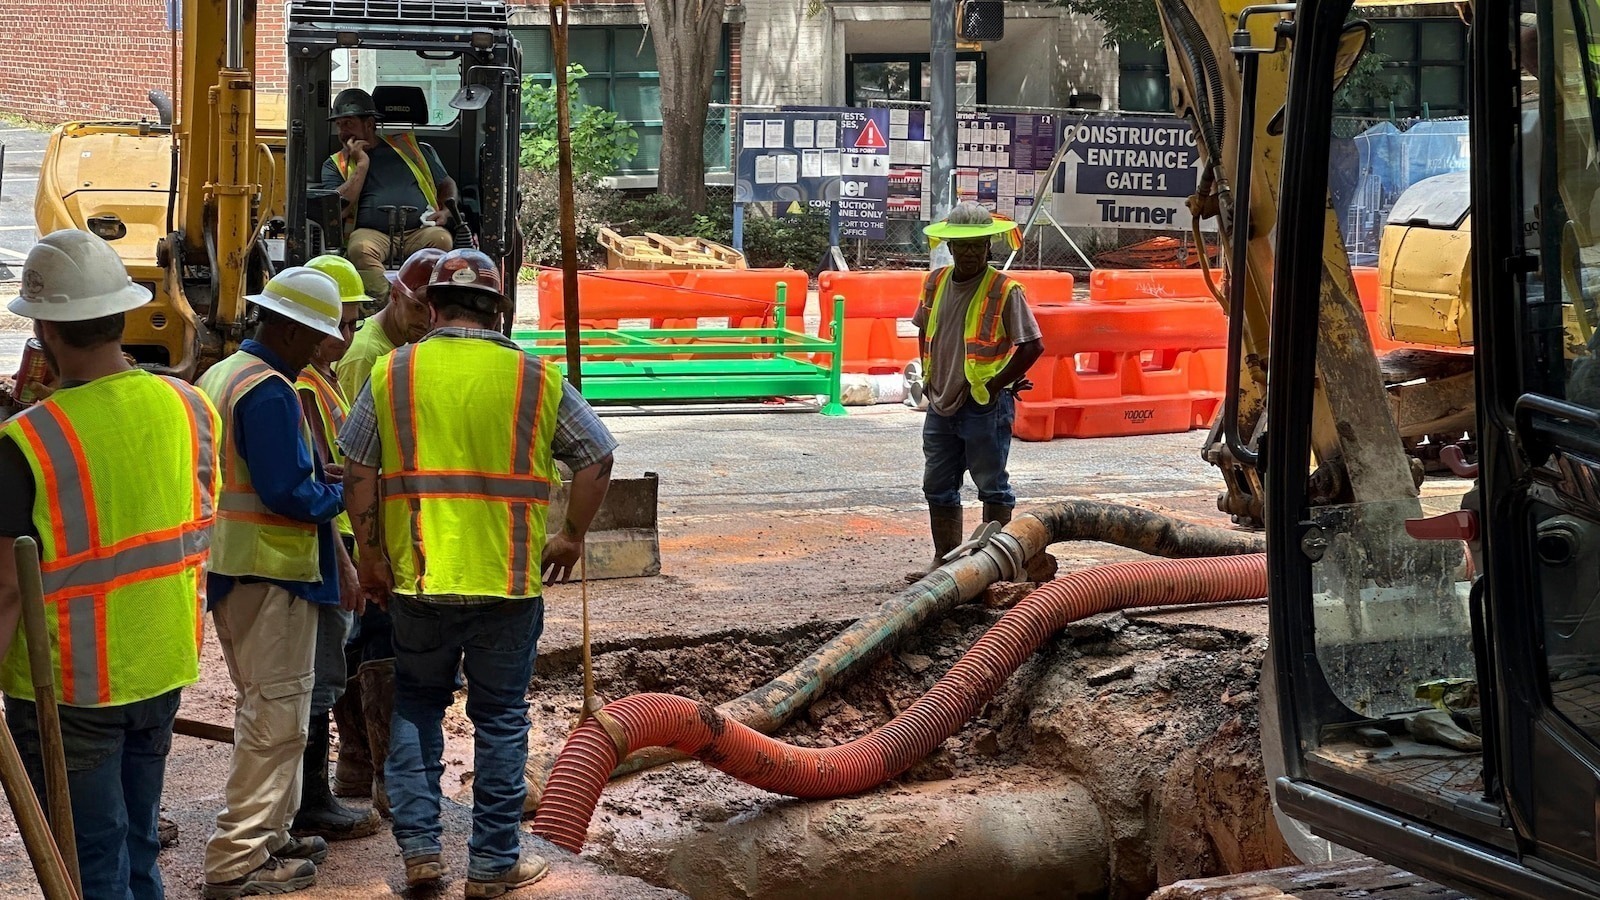 Atlanta's water system is still under repair on day 5 of the outage